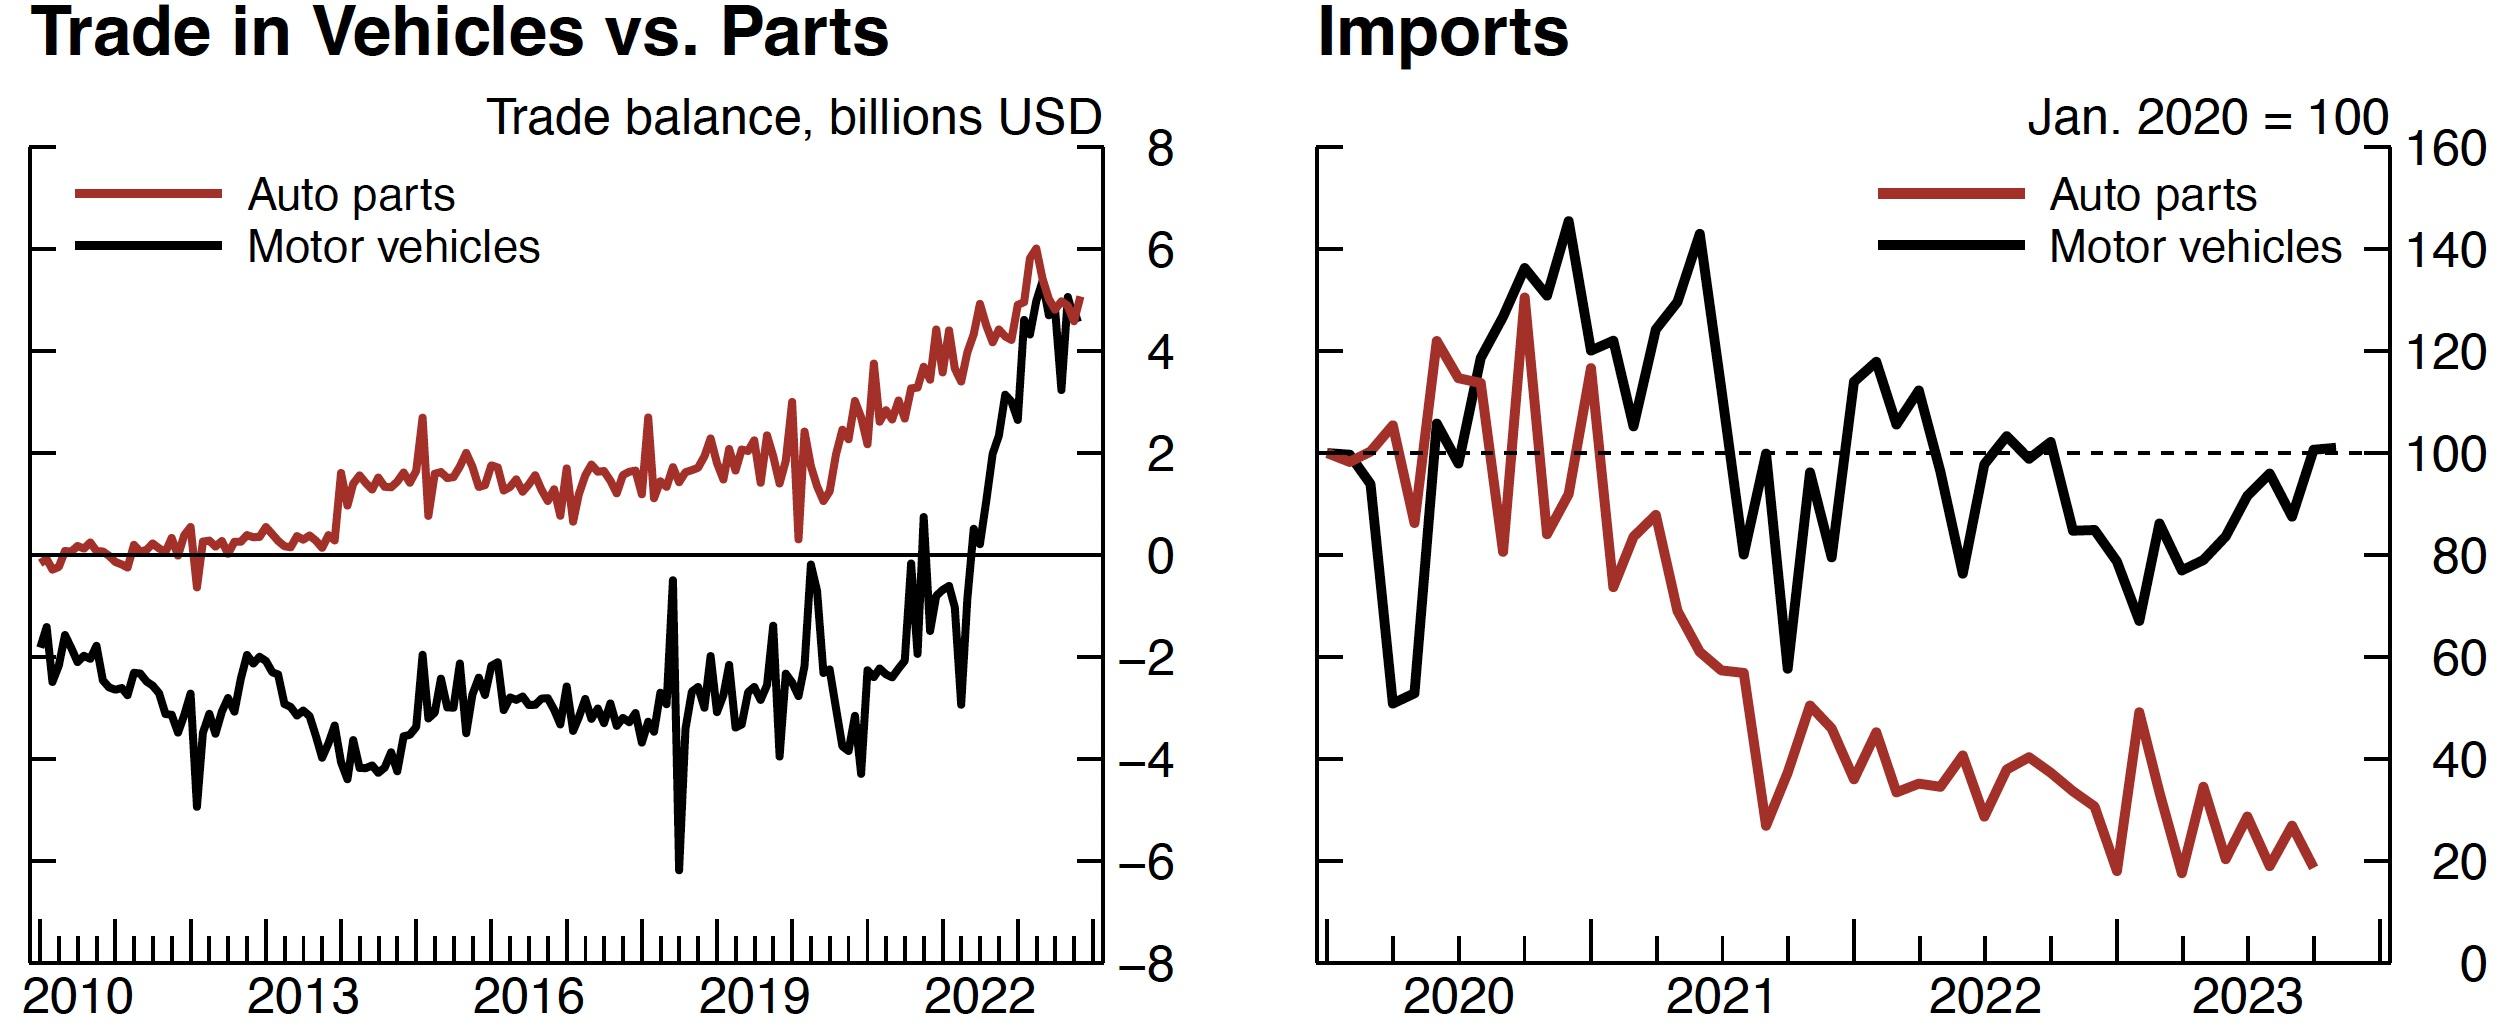 Figure 6 Evolution of trade in auto parts and motor vehicles